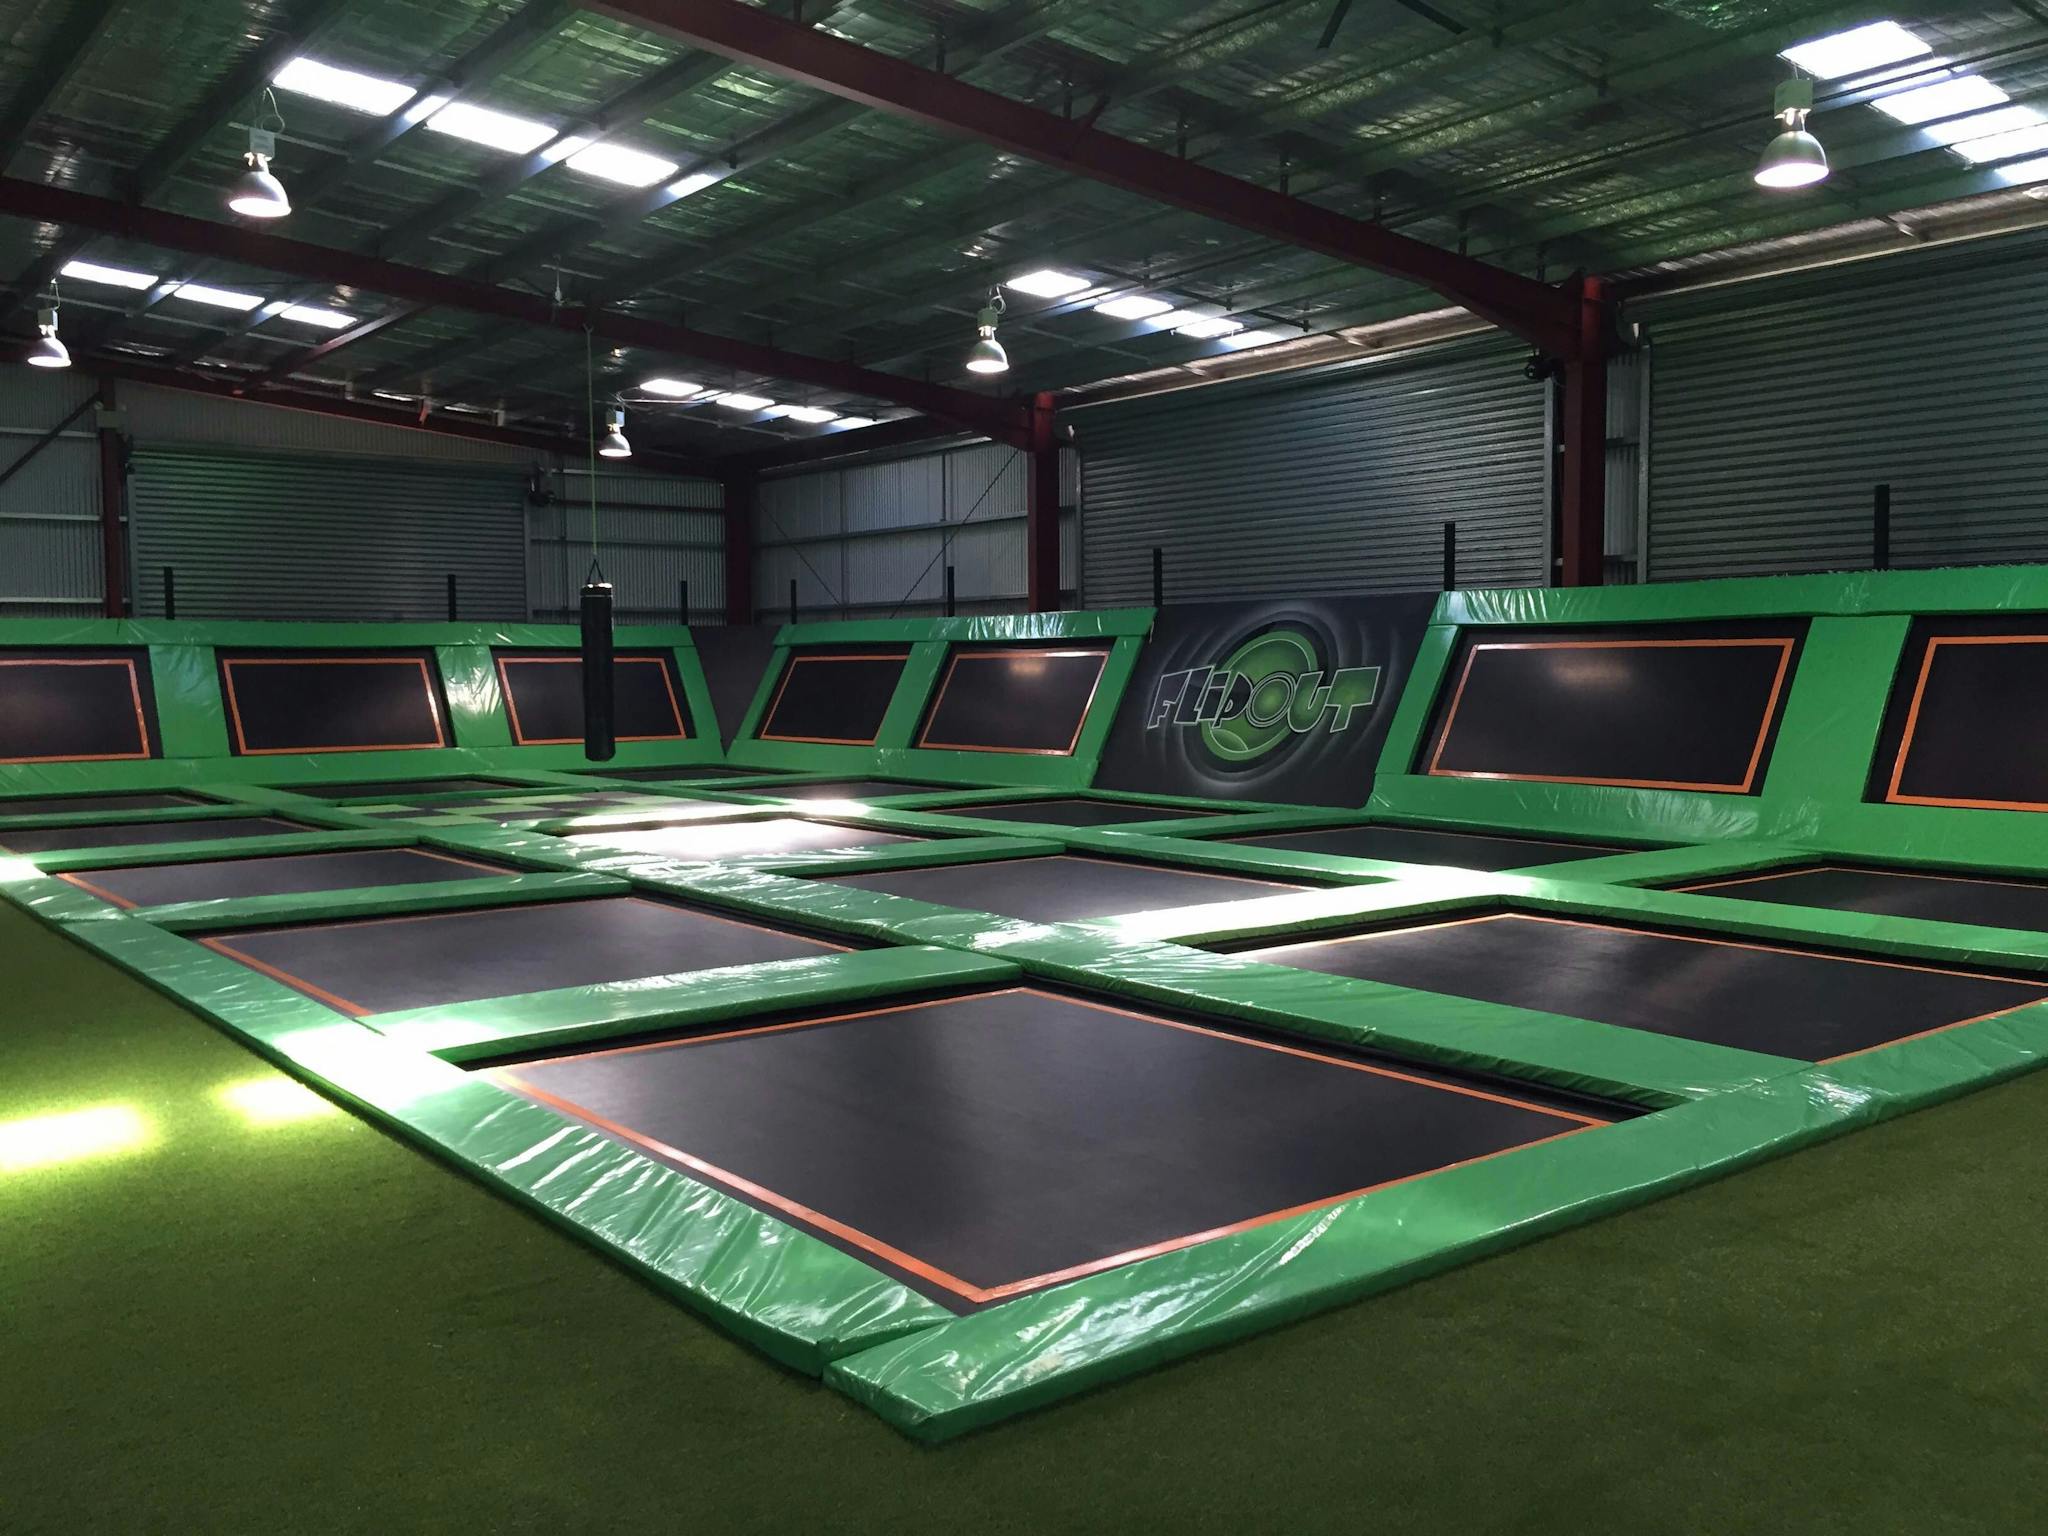 The trampolines at Flip Out Wagga Wagga